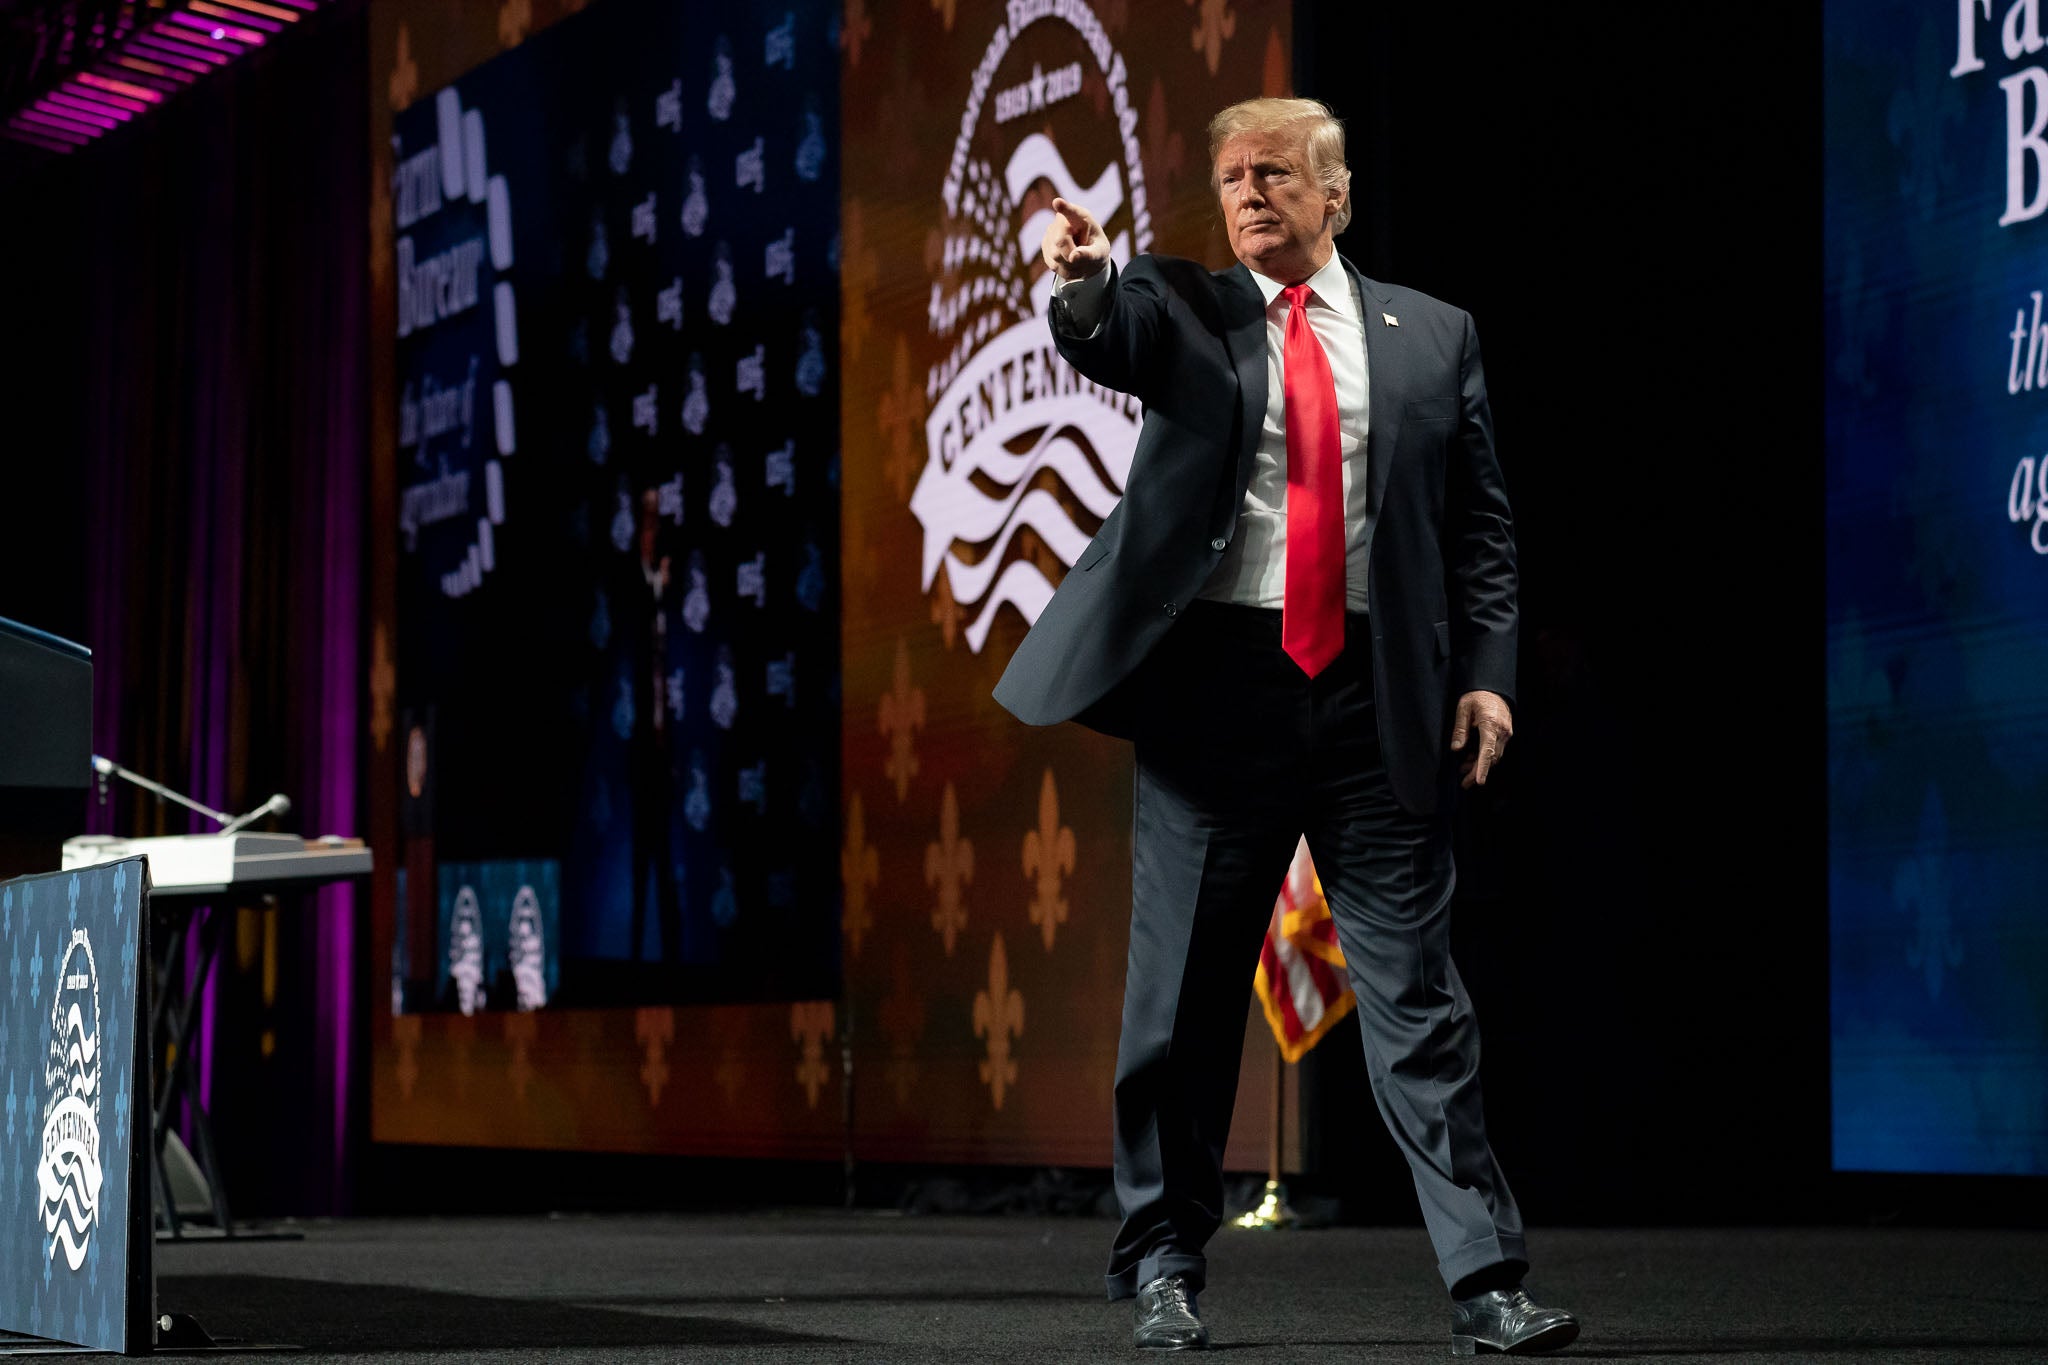 President Donald Trump delivers remarks during the American Farm Bureau Federation’s 100th Annual Convention on January 14, 2019 in New Orleans, Louisiana.